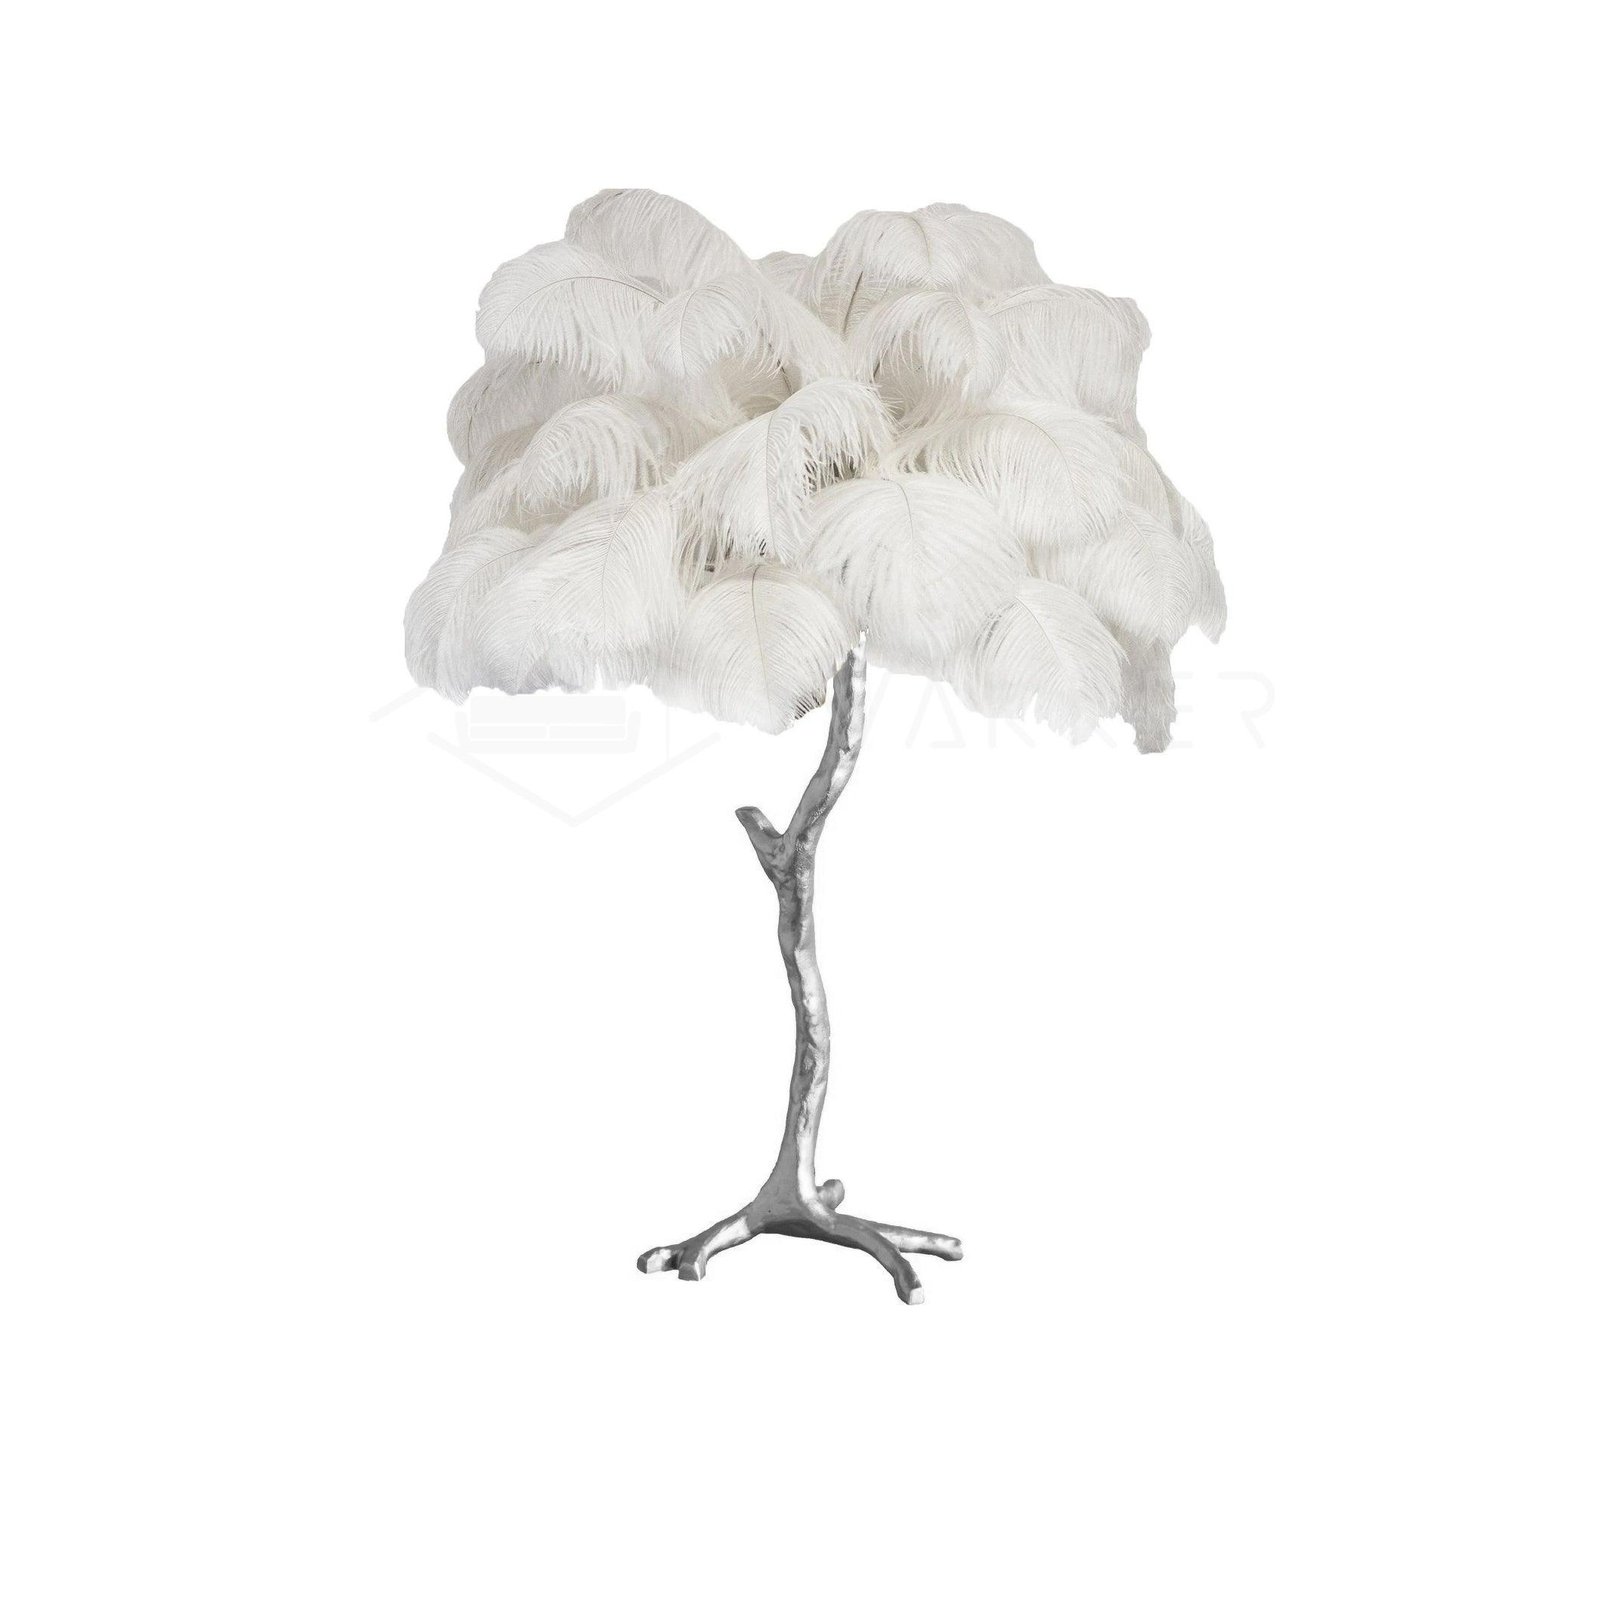 Silver and White Table Lamp with Ostrich Feather Shade - Measures 29.5" in Diameter and 29.5" in Height (or 75cm in Diameter and 75cm in Height)